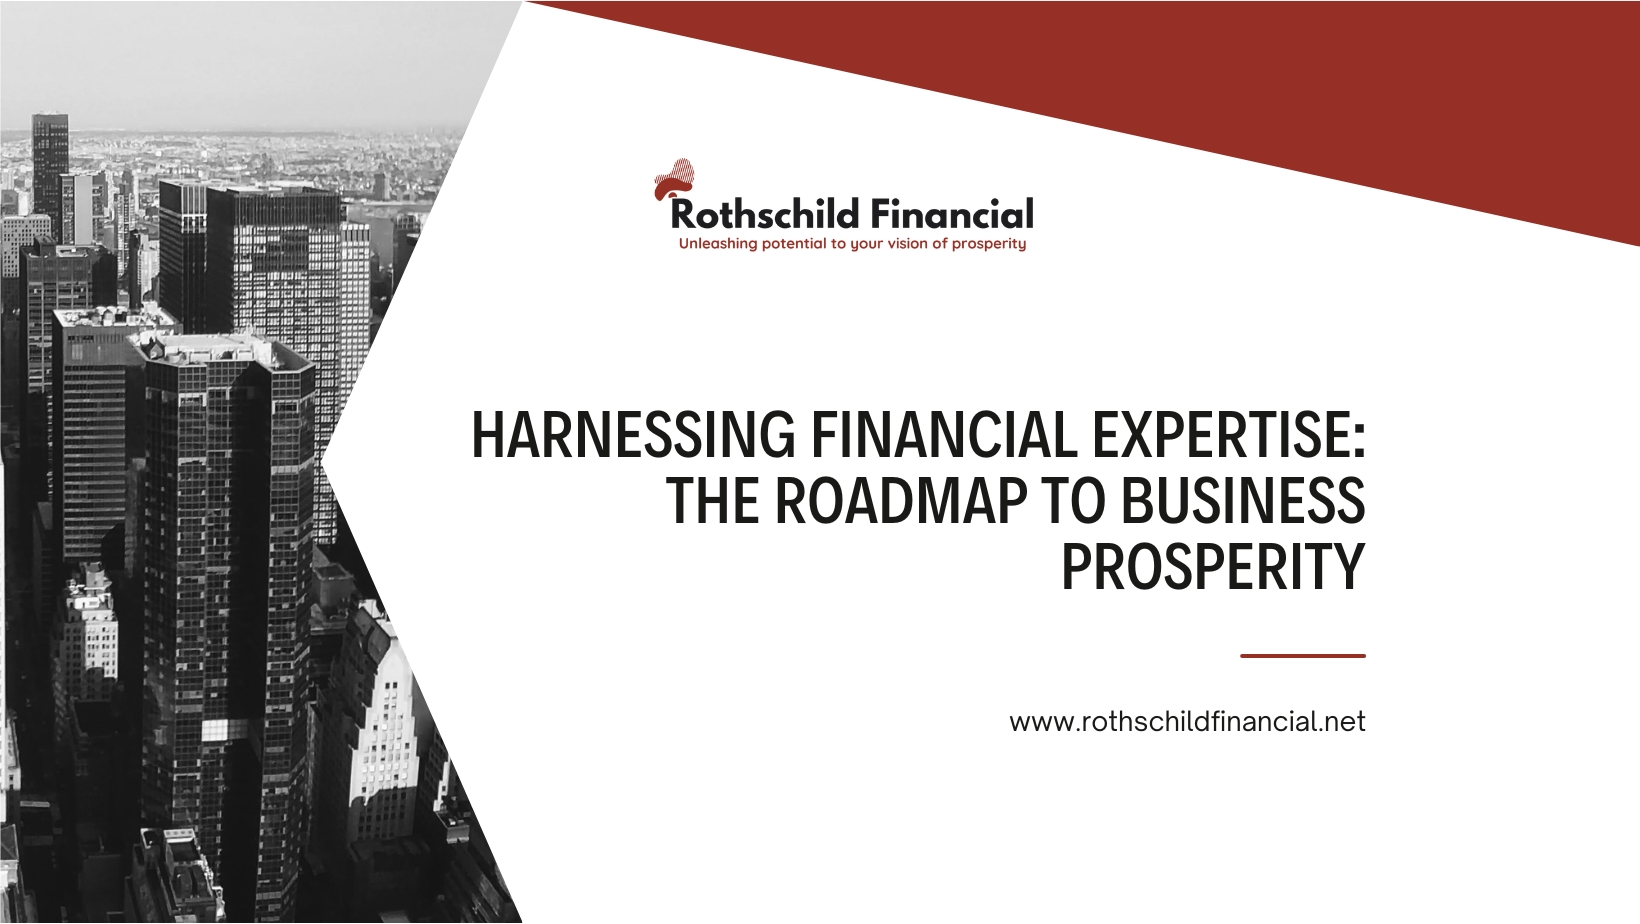 Harnessing Financial Expertise- The Roadmap to Business Prosperity